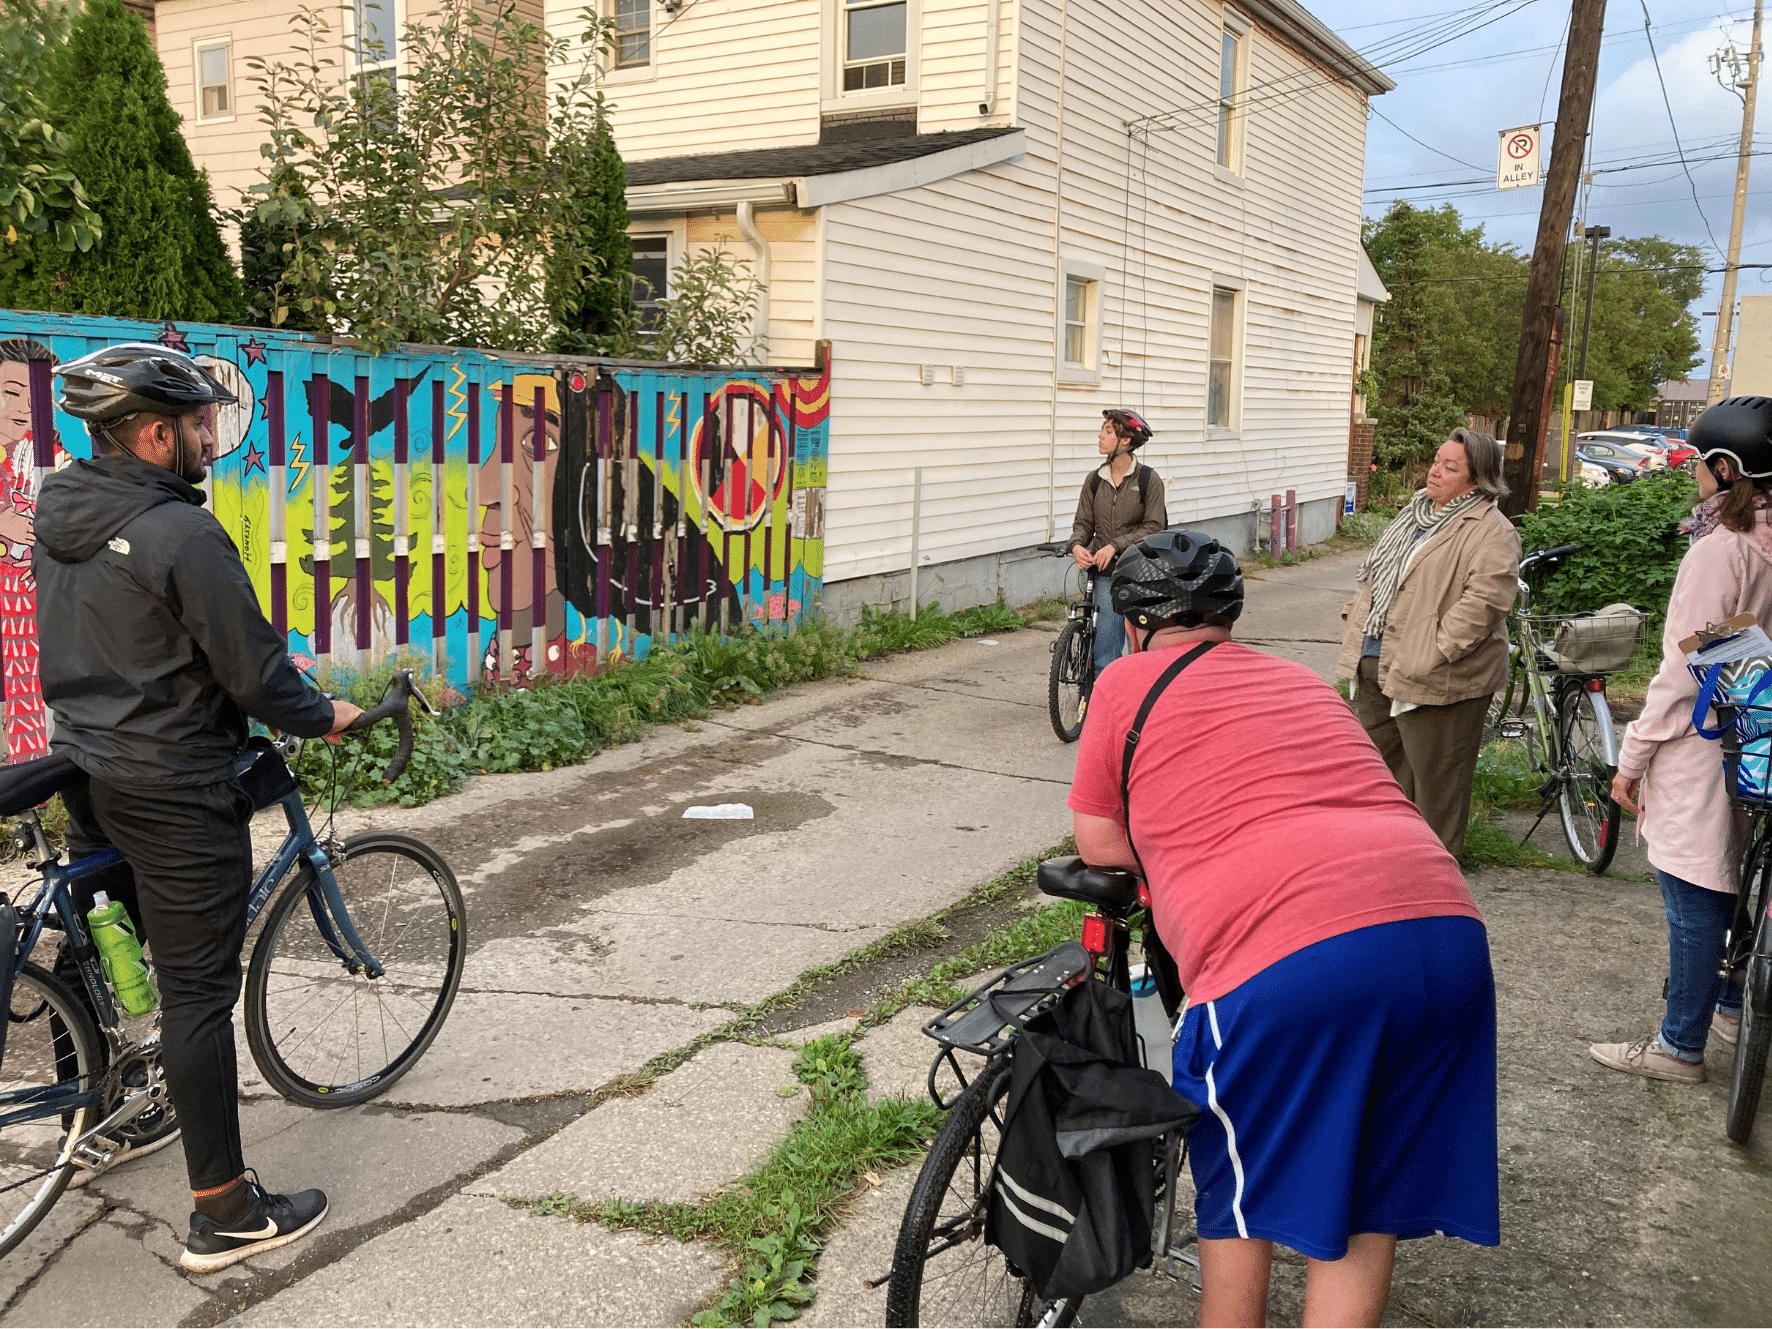 A small group of people standing in an alley with their bicycles looking at a colourful mural that has been painted on a fence